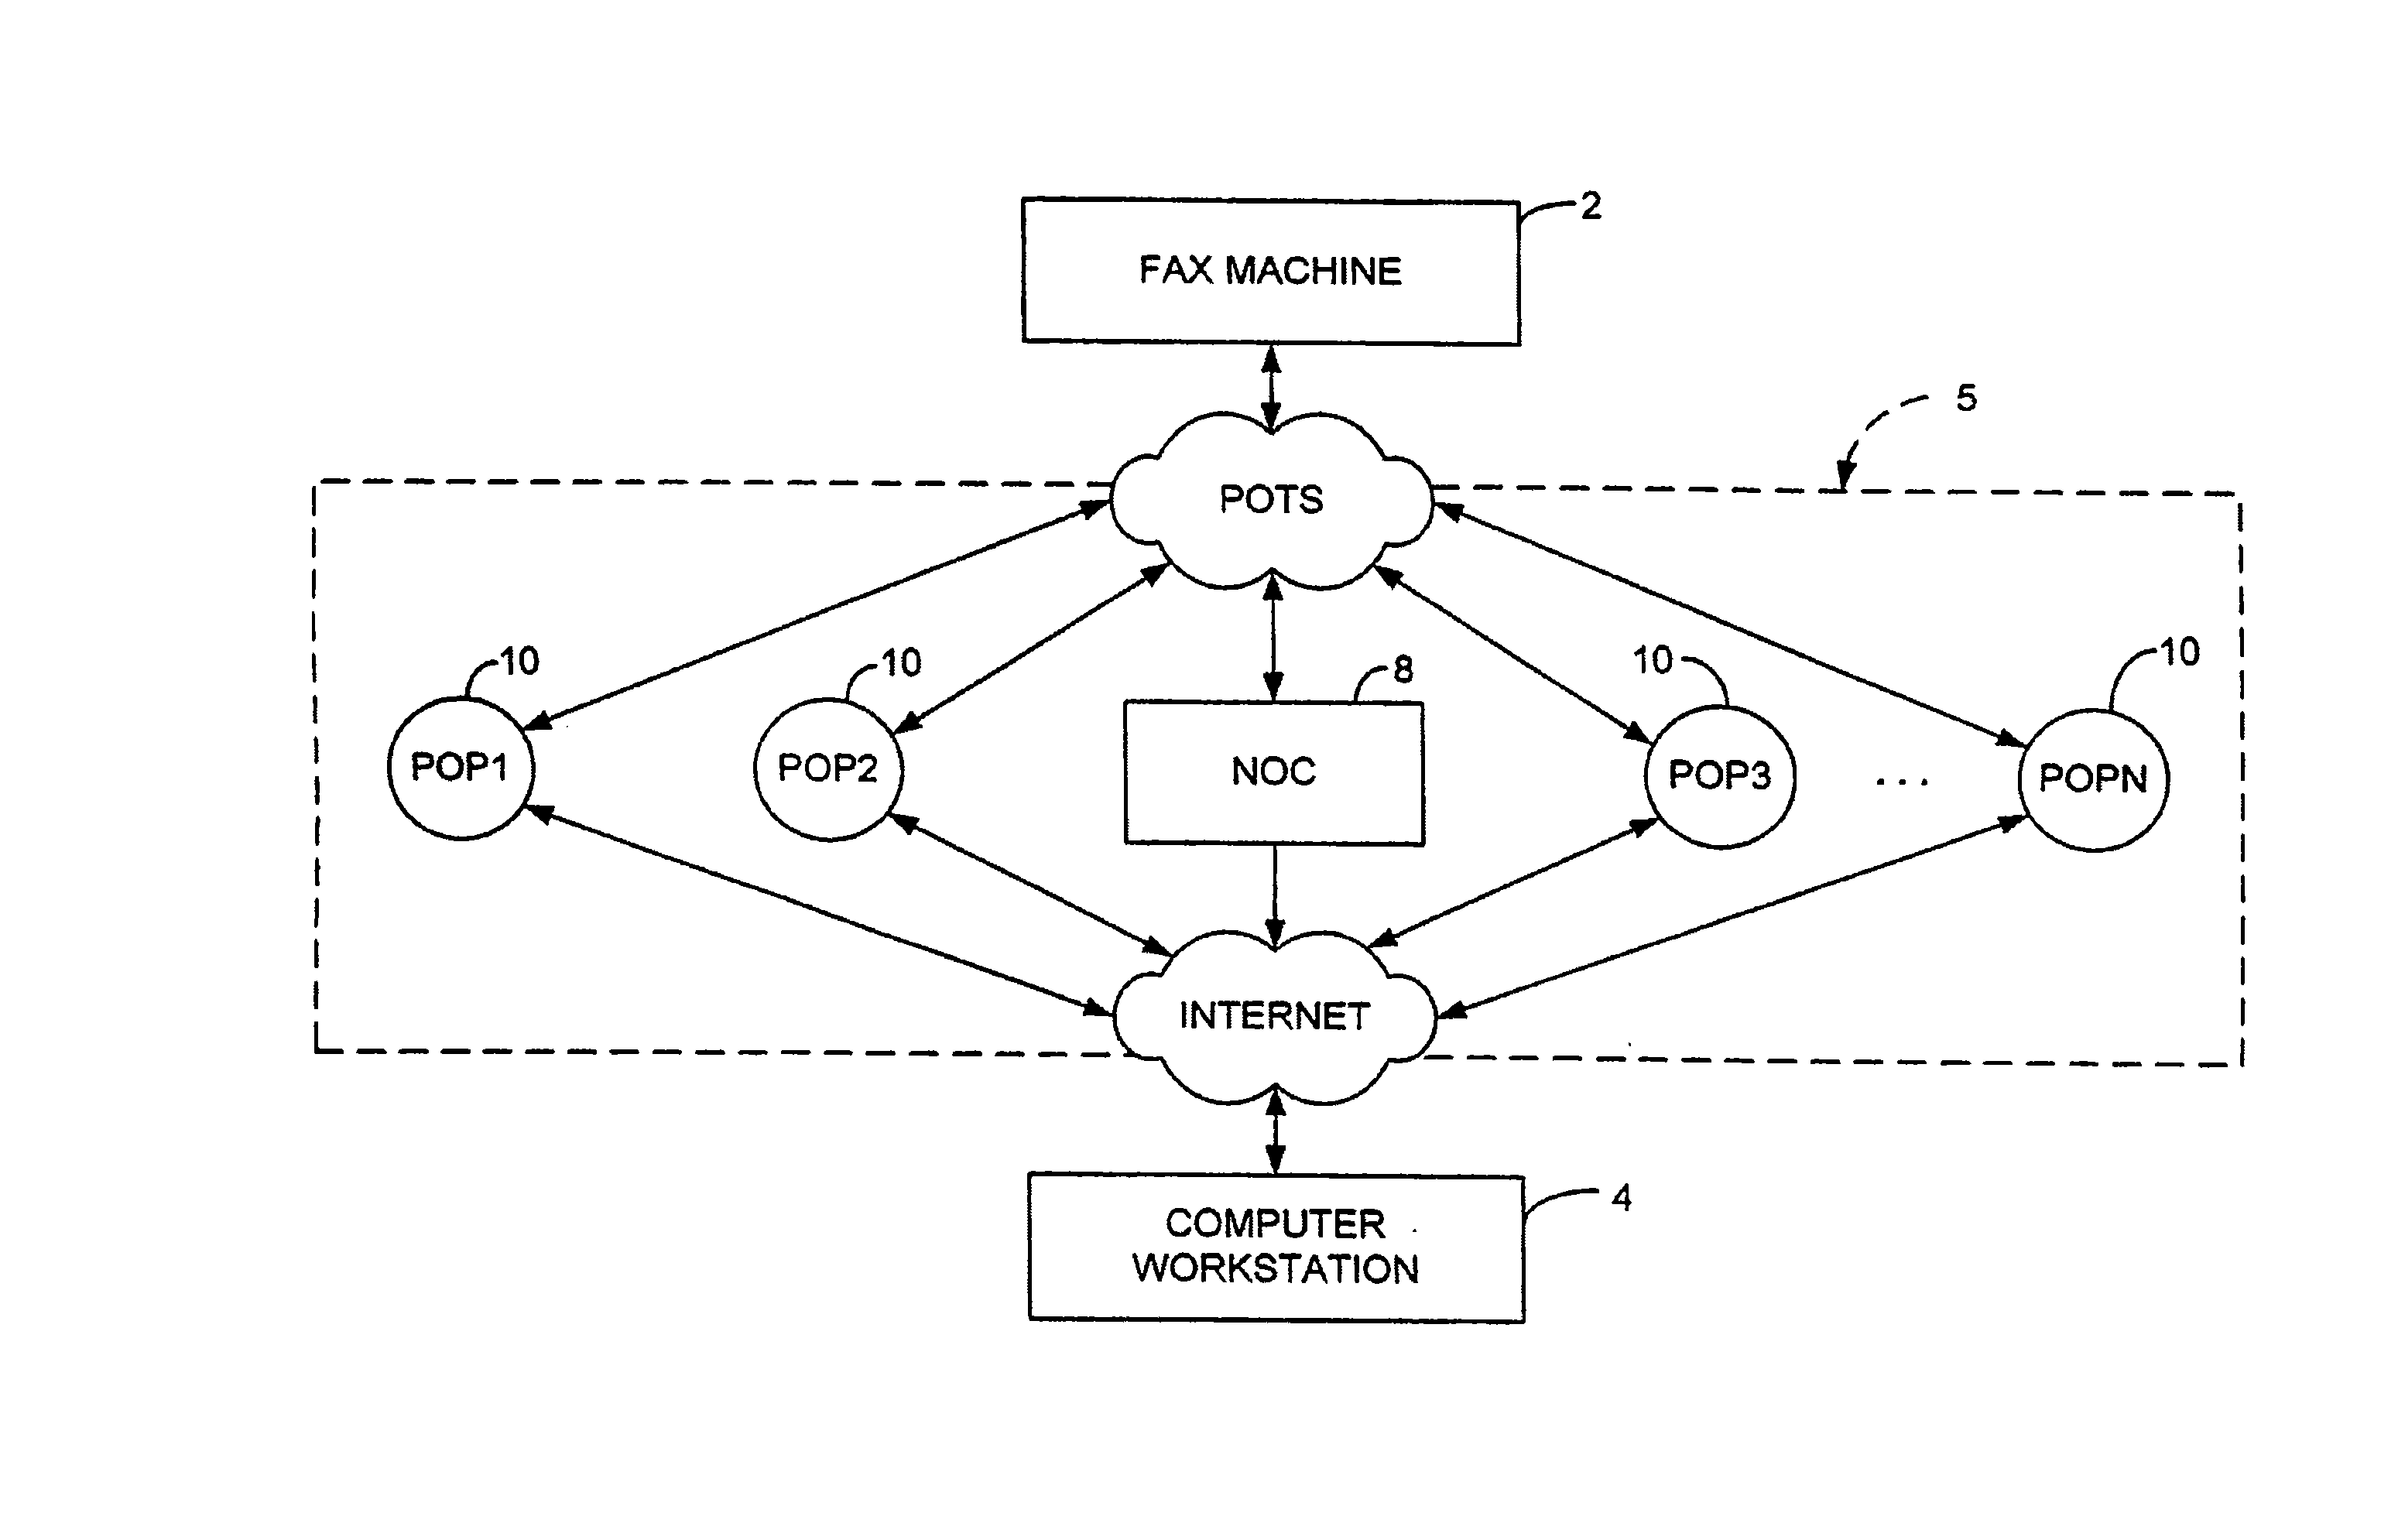 Methods and apparatus for authenticating facsimile transmissions to electronic storage destinations